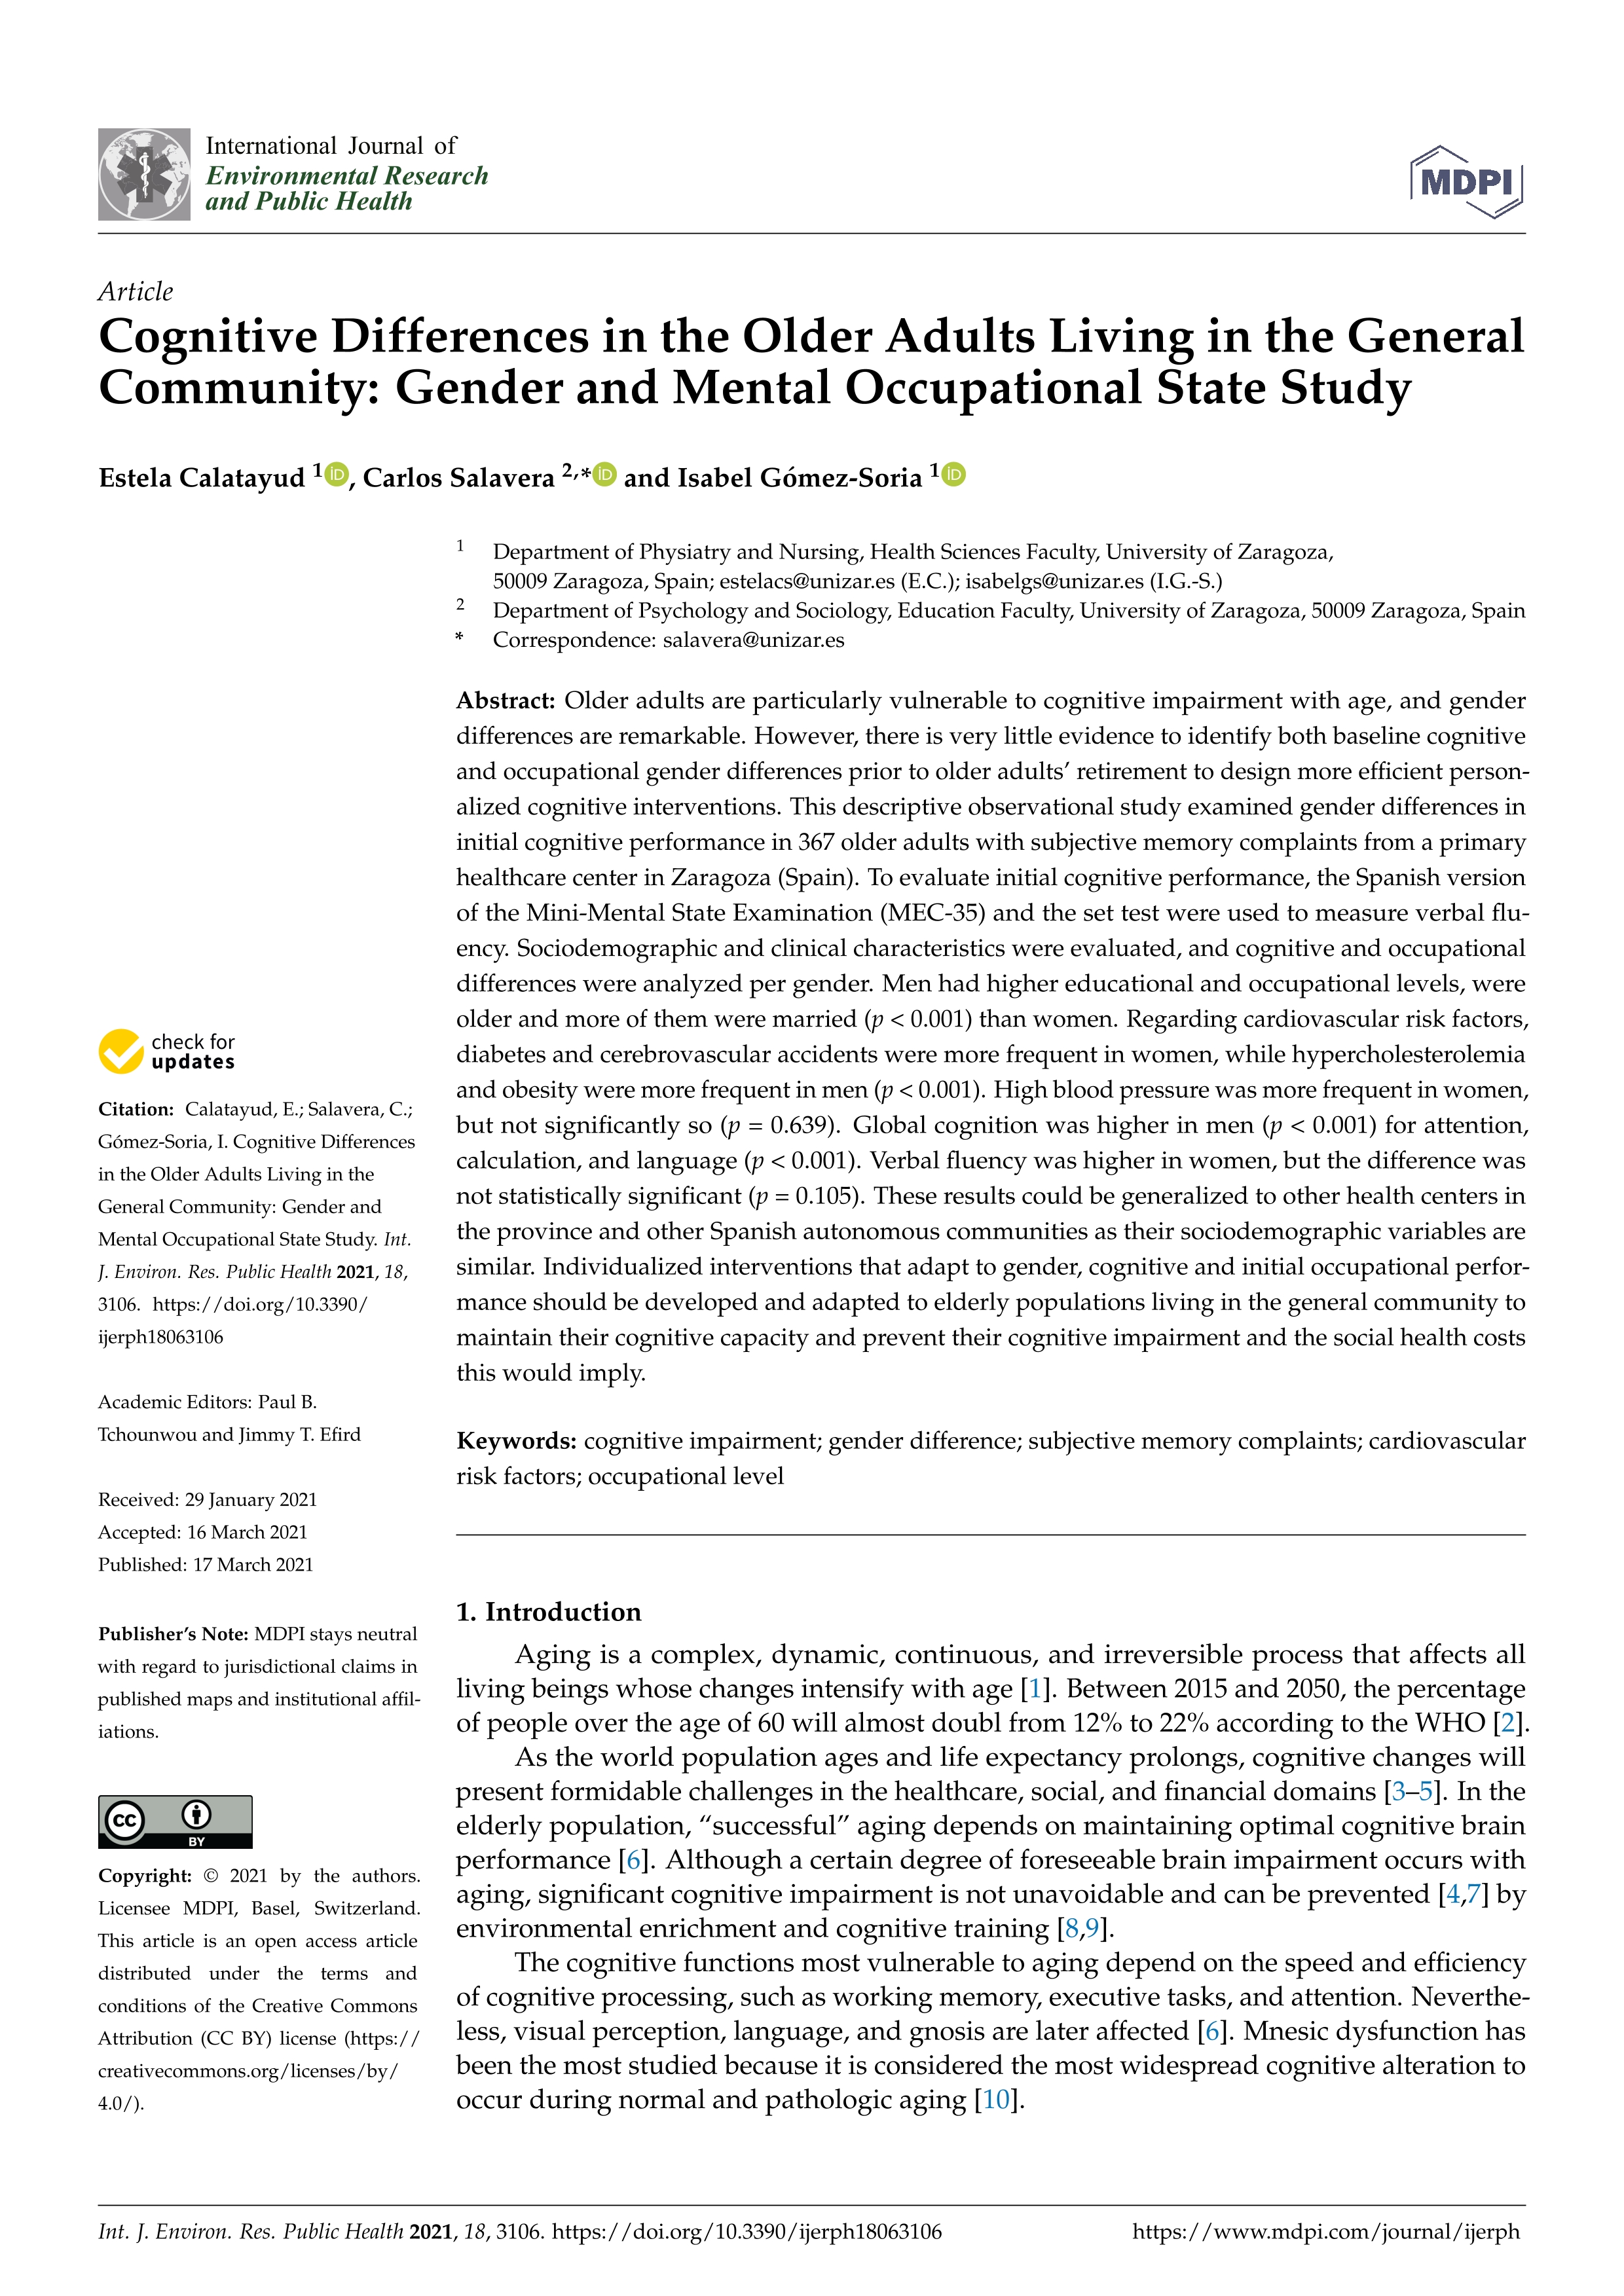 Cognitive differences in the older adults living in the general community: gender and mental occupational state study